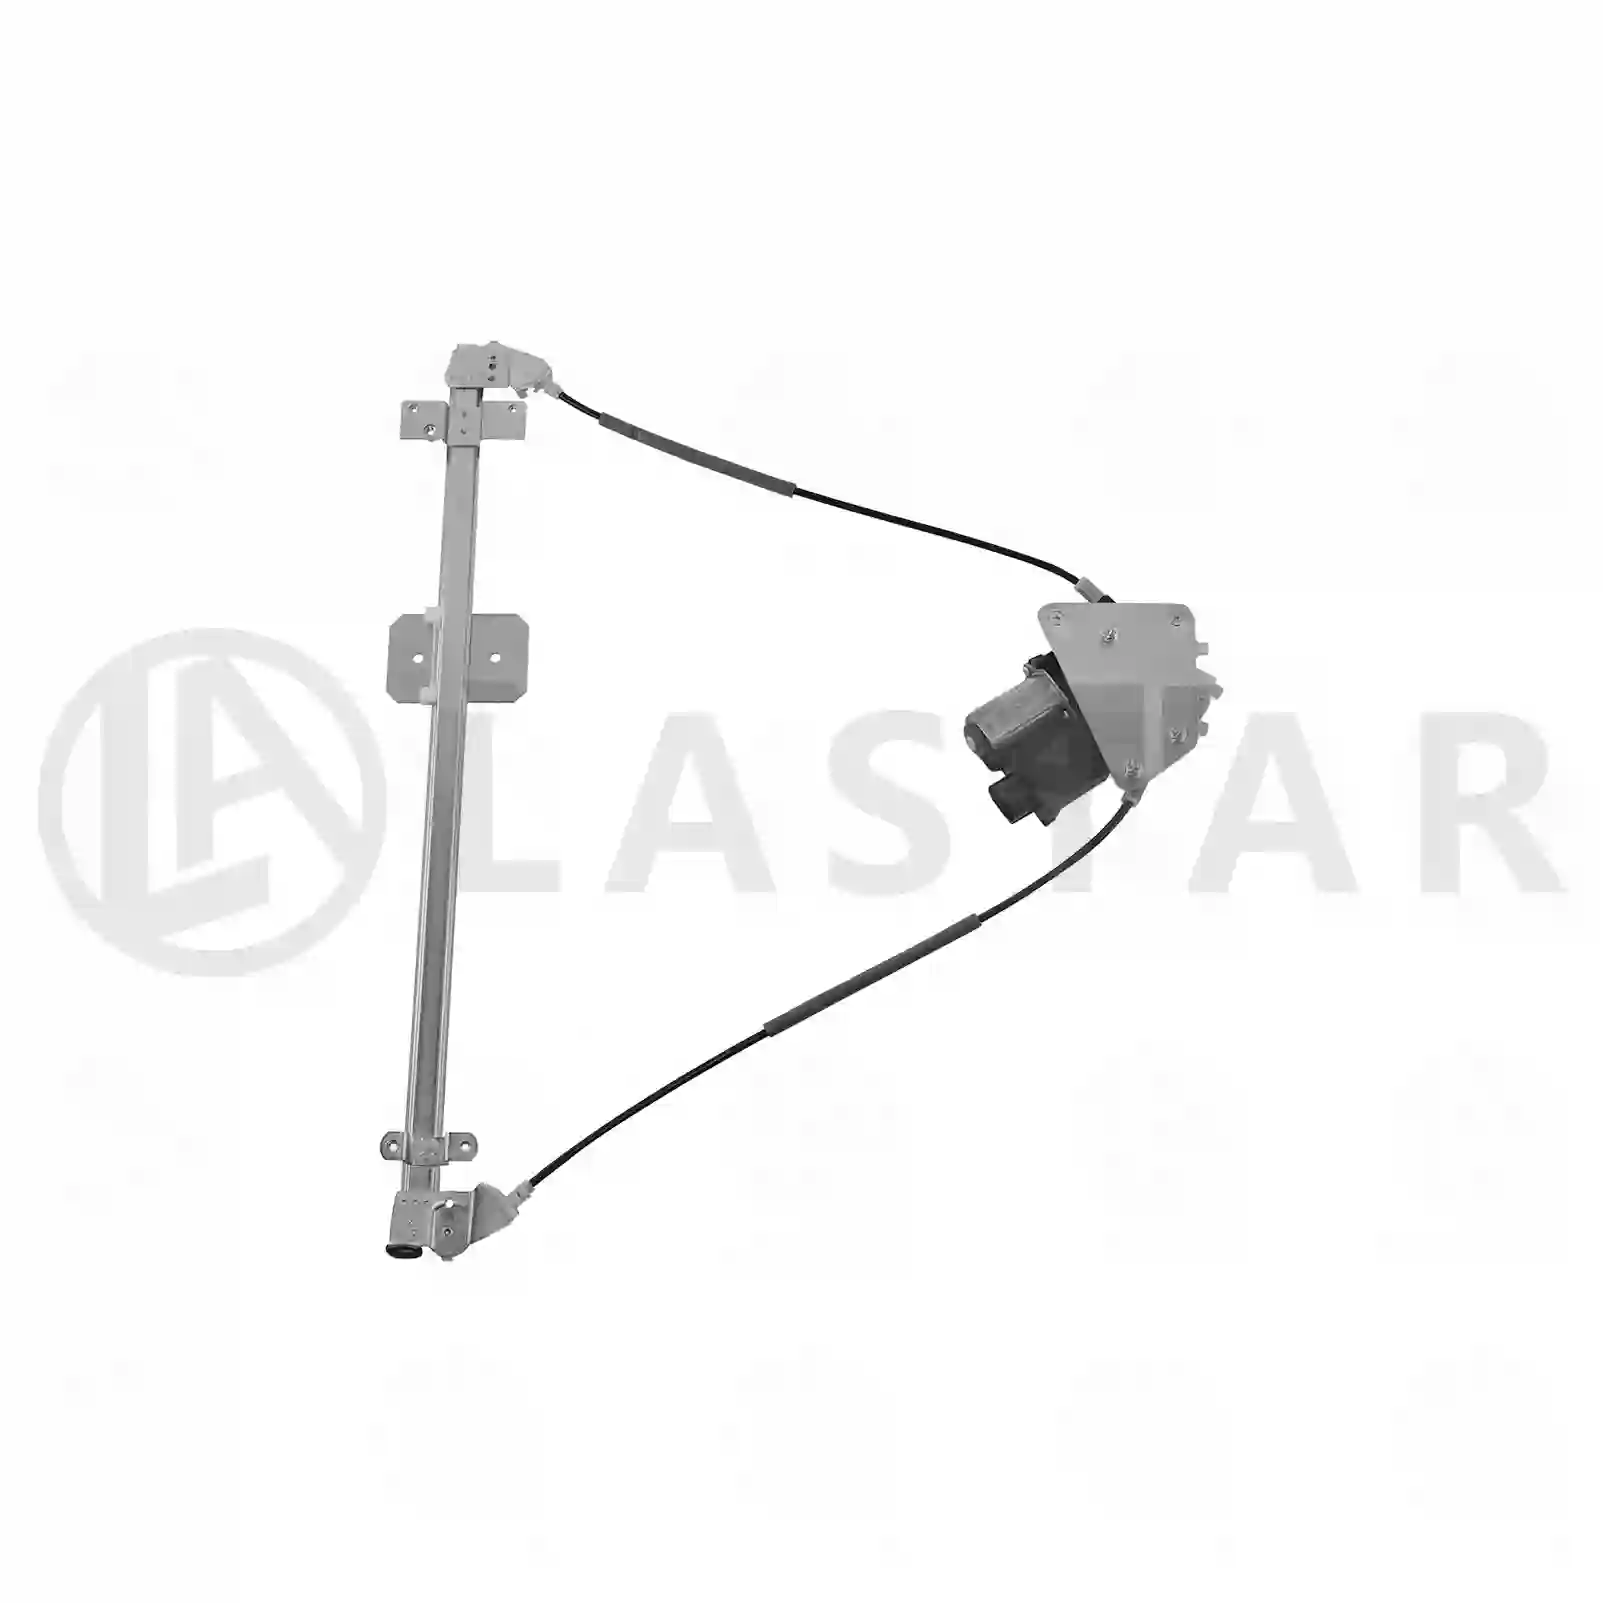 Window regulator, left, electrical, with motor, 77719928, 1779721, 1918145S, 2130642S, 2148573, ZG61298-0008 ||  77719928 Lastar Spare Part | Truck Spare Parts, Auotomotive Spare Parts Window regulator, left, electrical, with motor, 77719928, 1779721, 1918145S, 2130642S, 2148573, ZG61298-0008 ||  77719928 Lastar Spare Part | Truck Spare Parts, Auotomotive Spare Parts